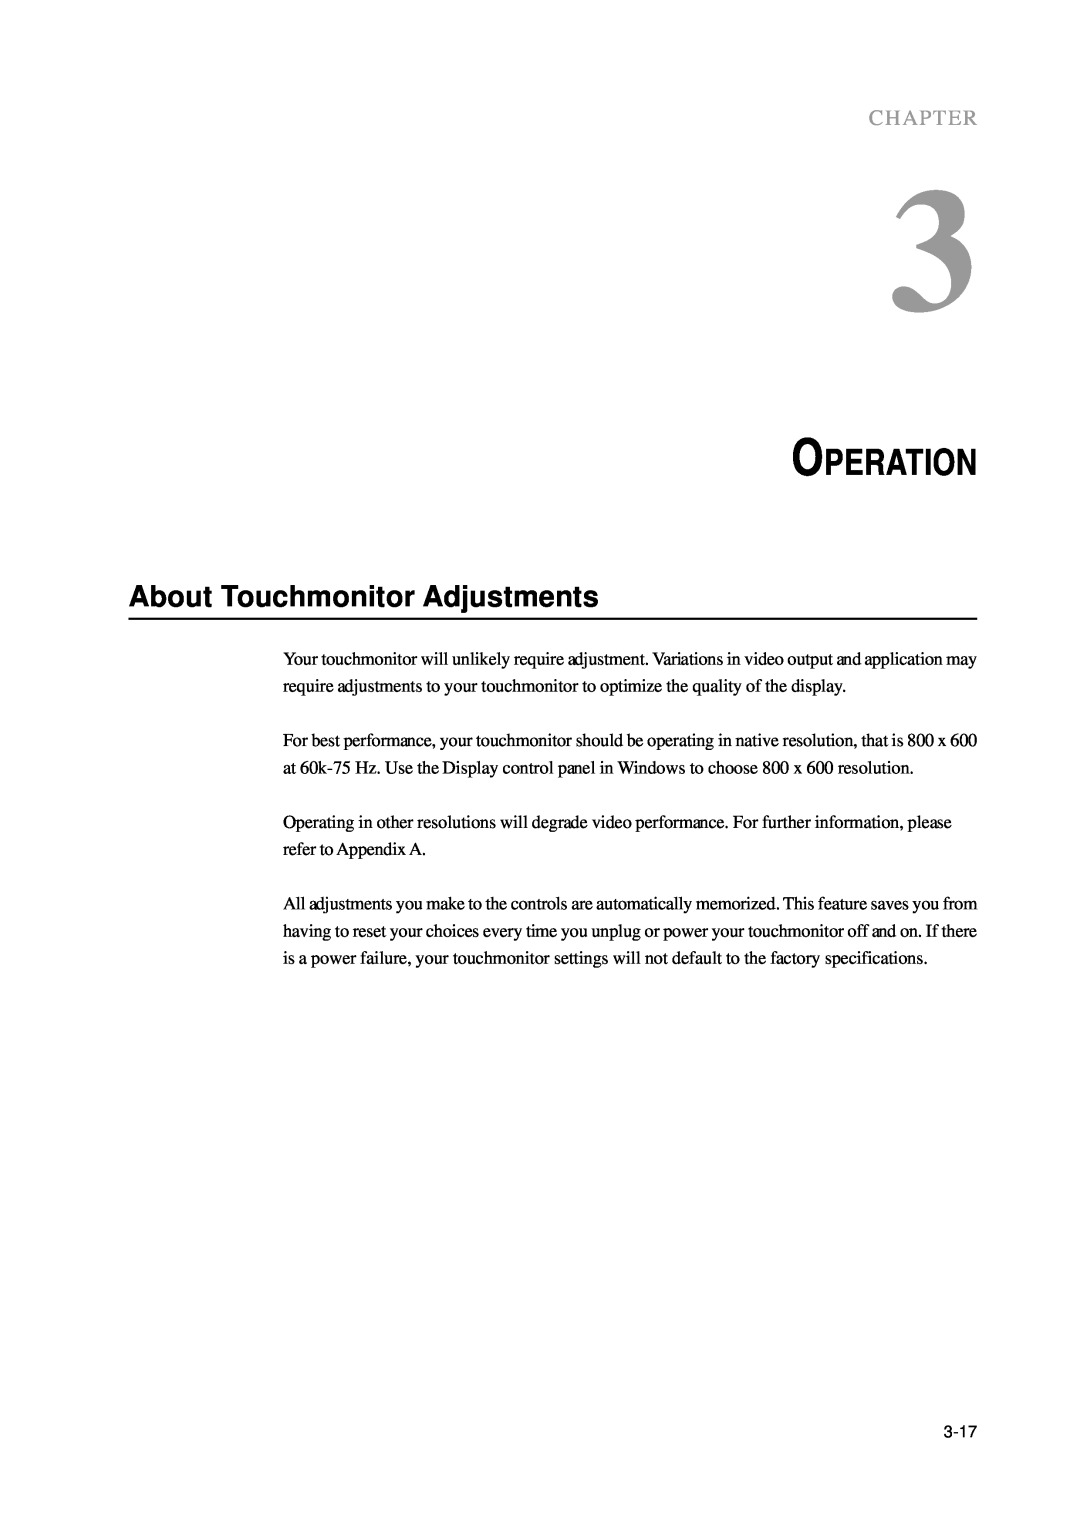 Tyco Electronics B1ET-1215L, ET1215L manual Operation, About Touchmonitor Adjustments, Chapter 